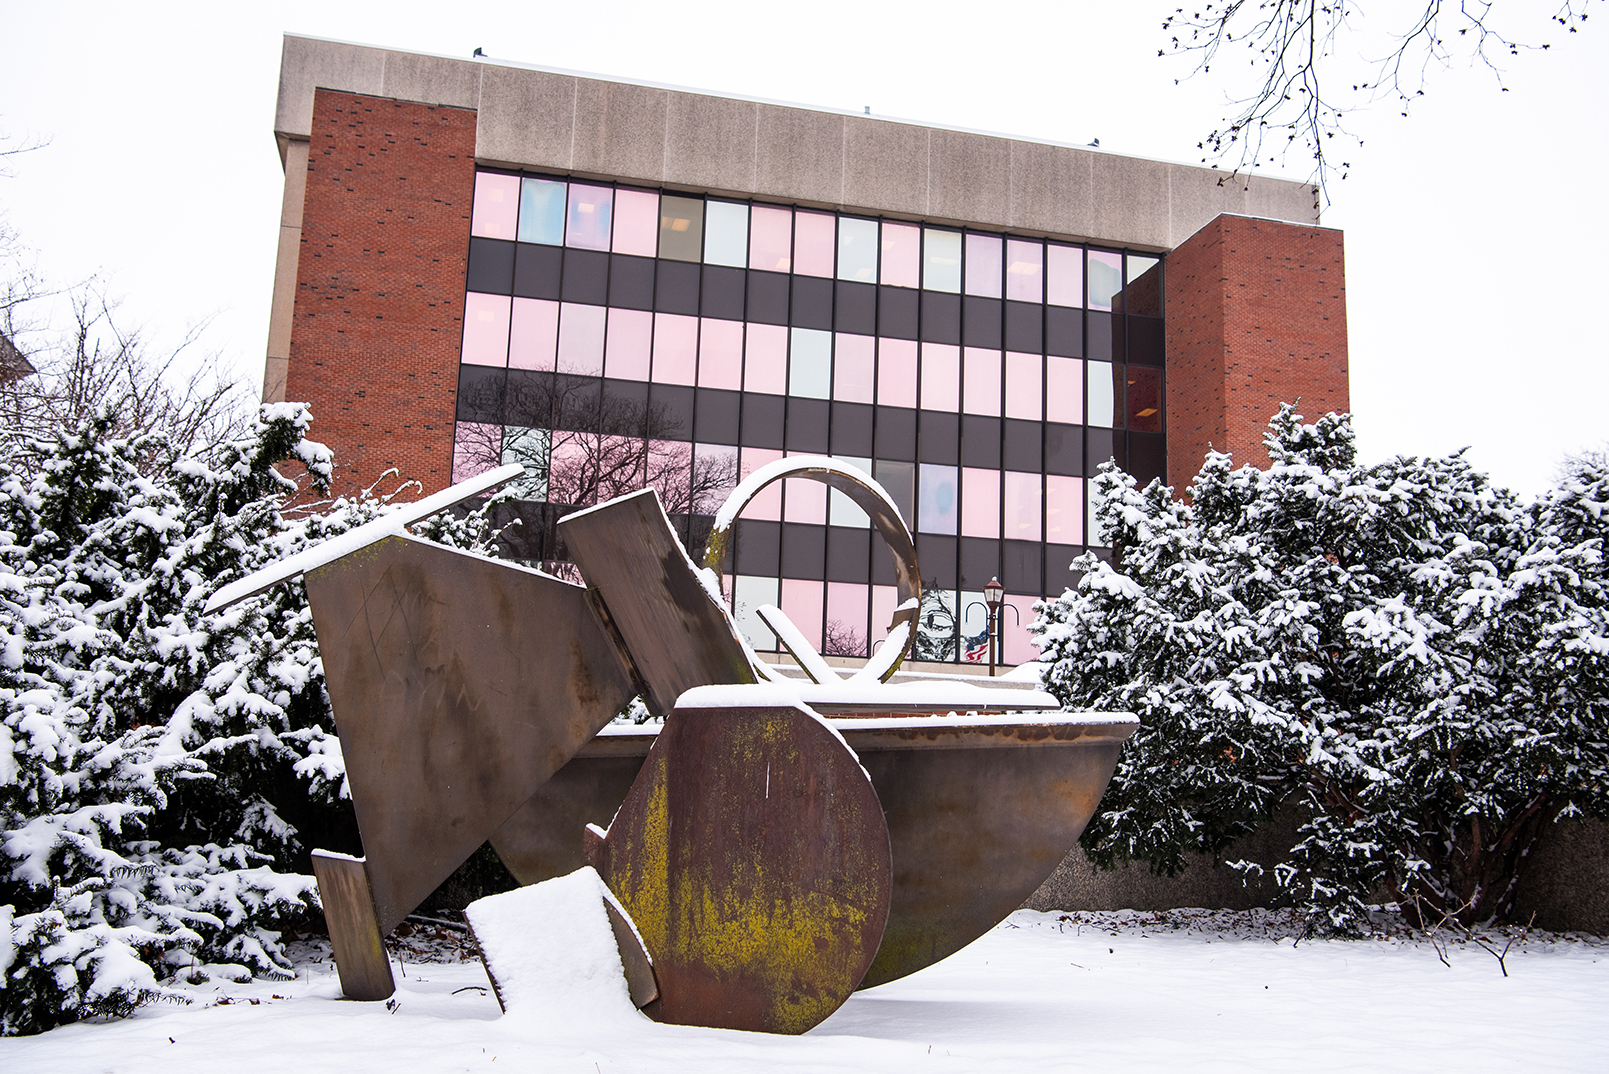 Abstract Variations sculpture by Ernest Trova with DeGarma Hall in the background